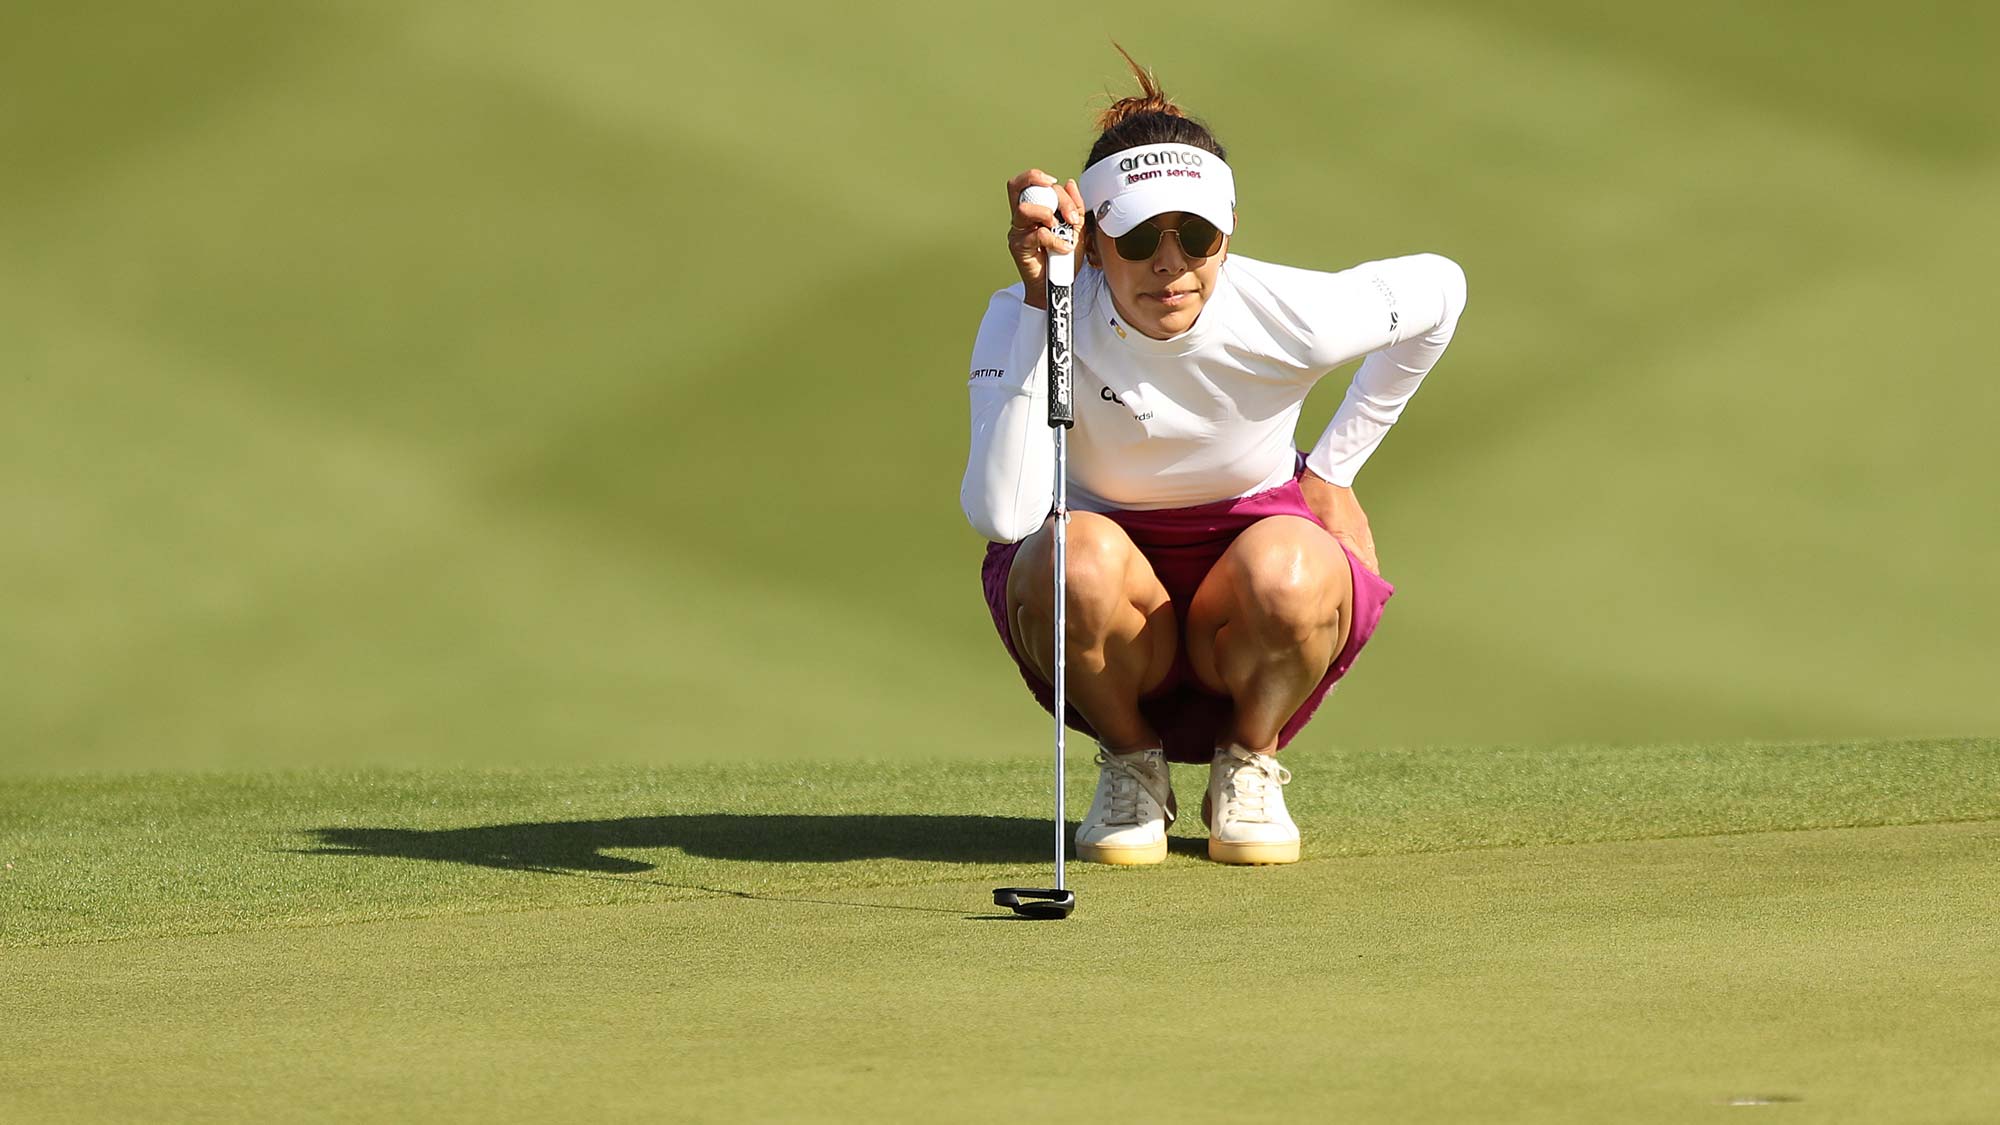 Alison Lee of the United States lines up her putt on the 11th green during the third round of the LPGA Drive On Championship